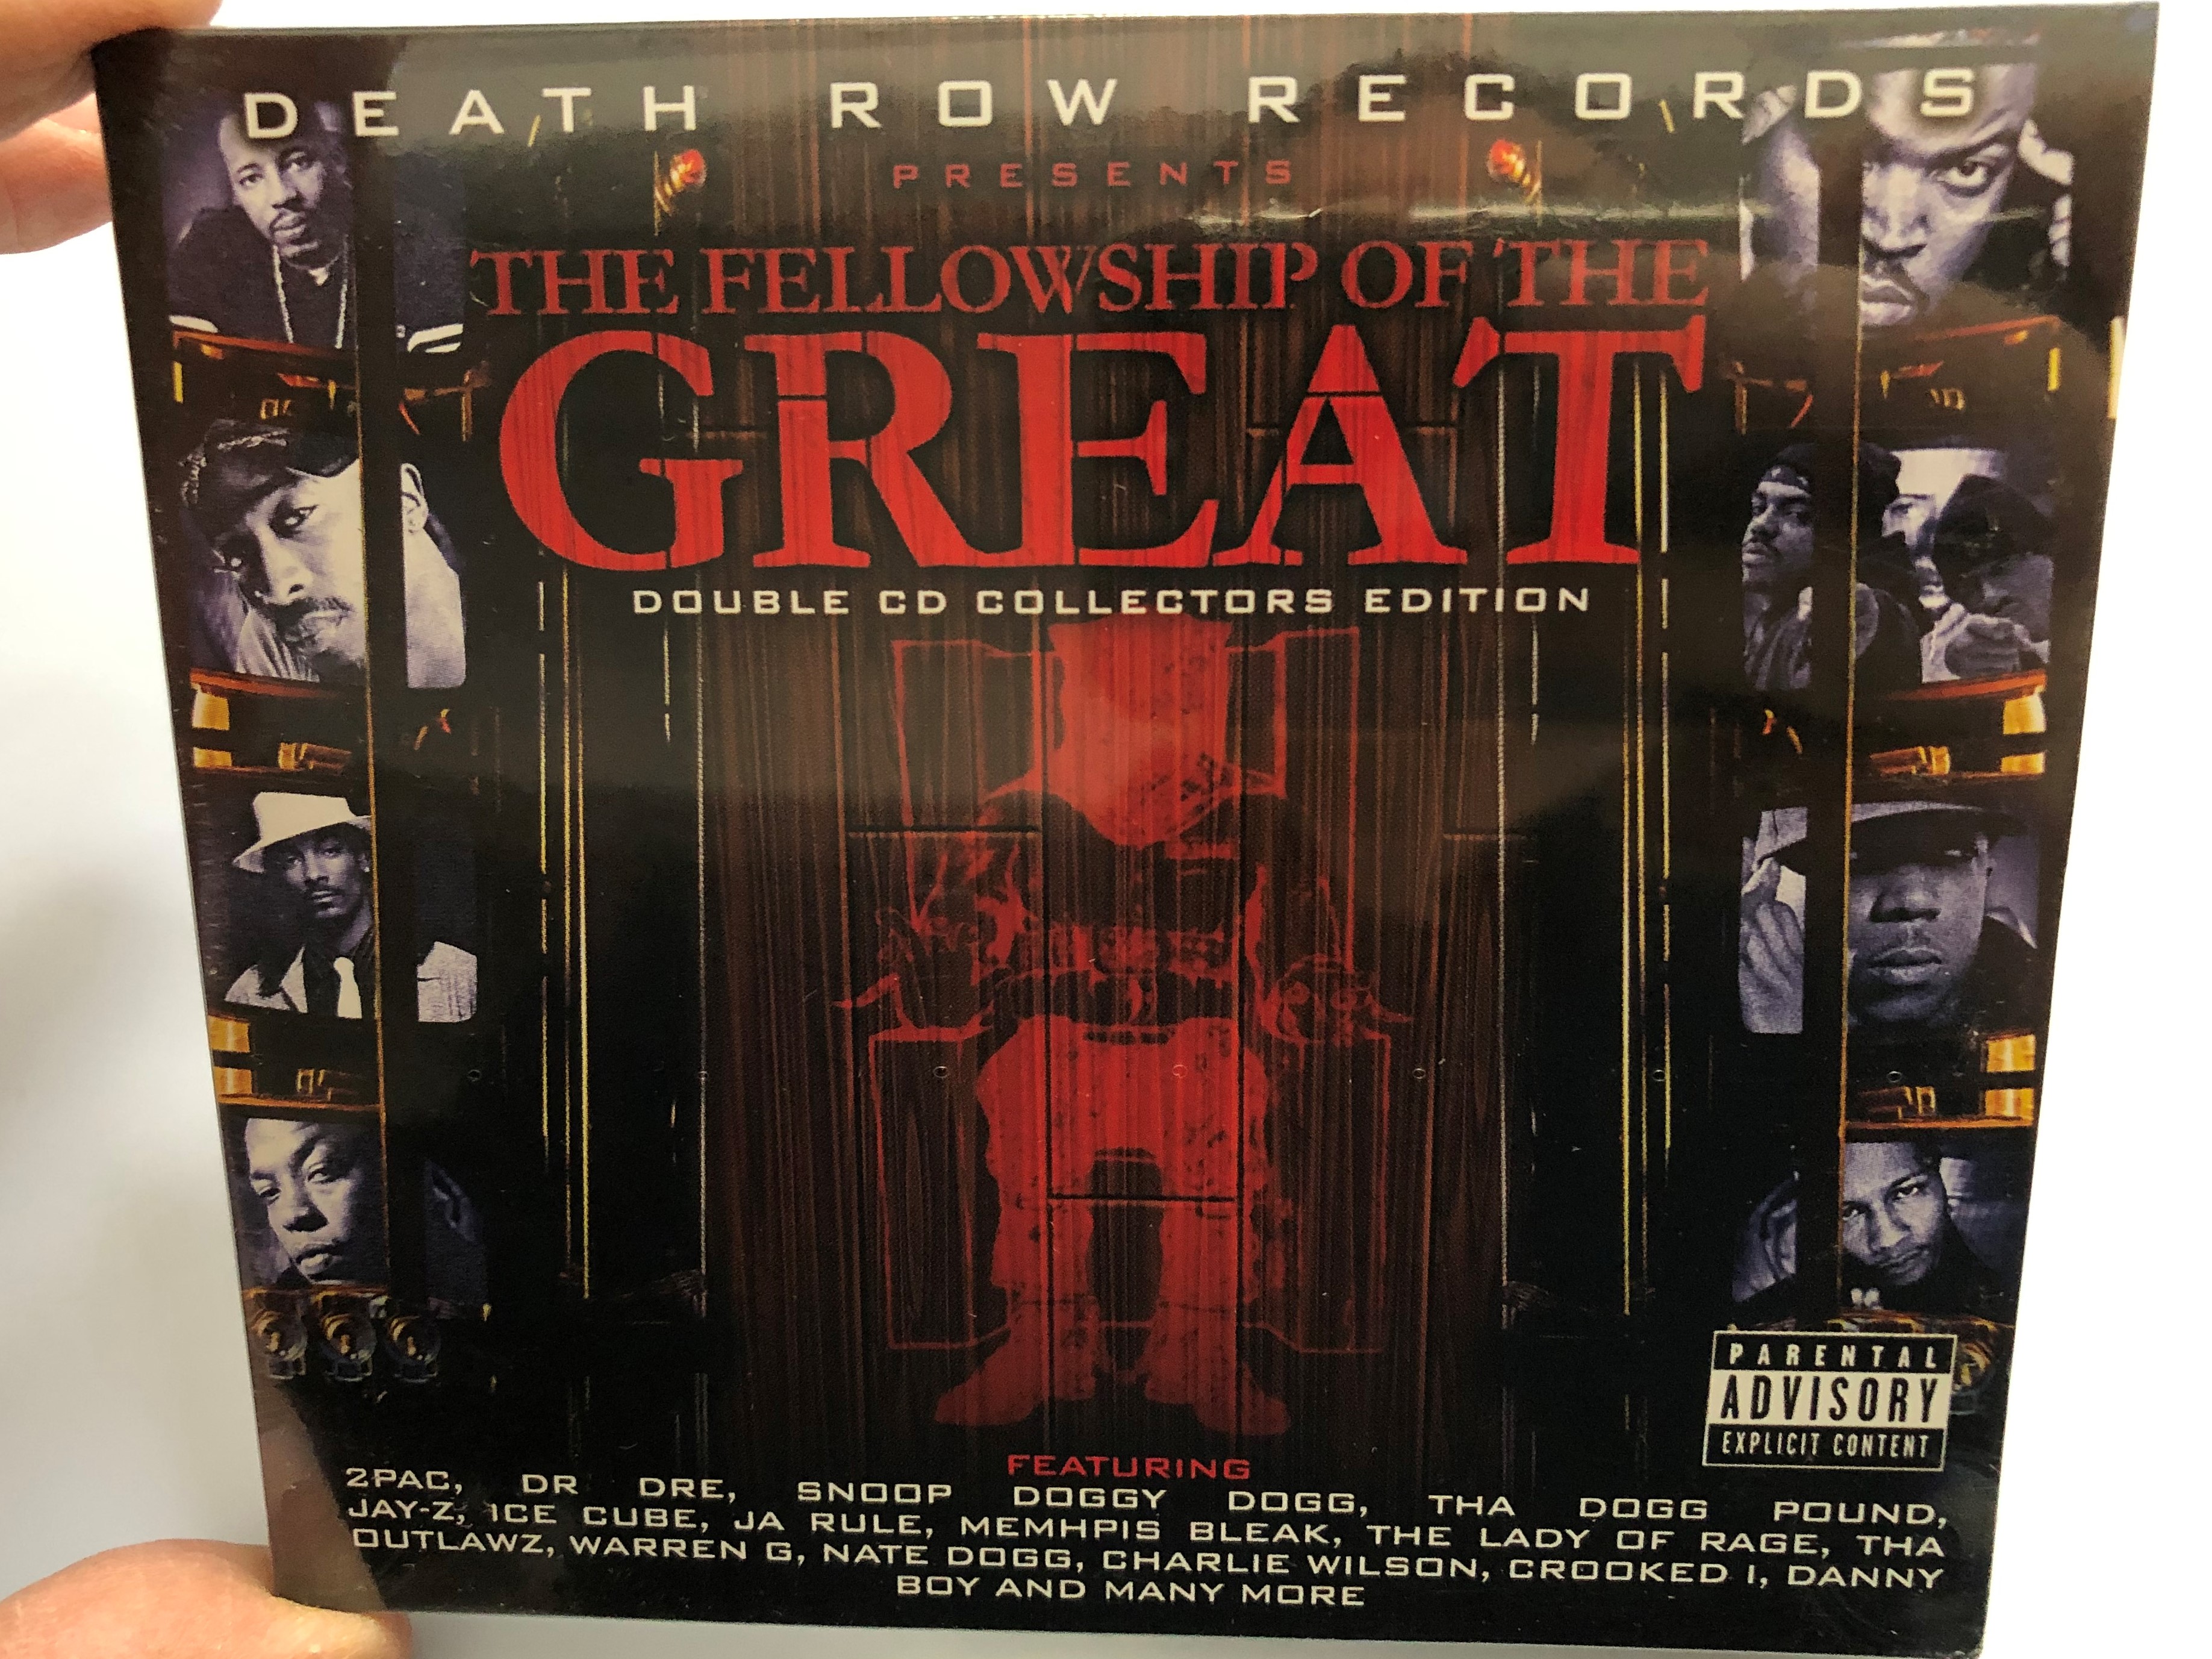 death-row-records-the-fellowship-of-the-great-double-cd-collectors-edition-featuring-2pac-dr-dre-snoop-doggy-dogg-tha-dogg-pound-jay-z-ice-cube-ja-rule-memhpis-bleak-death-row-reco-1-.jpg